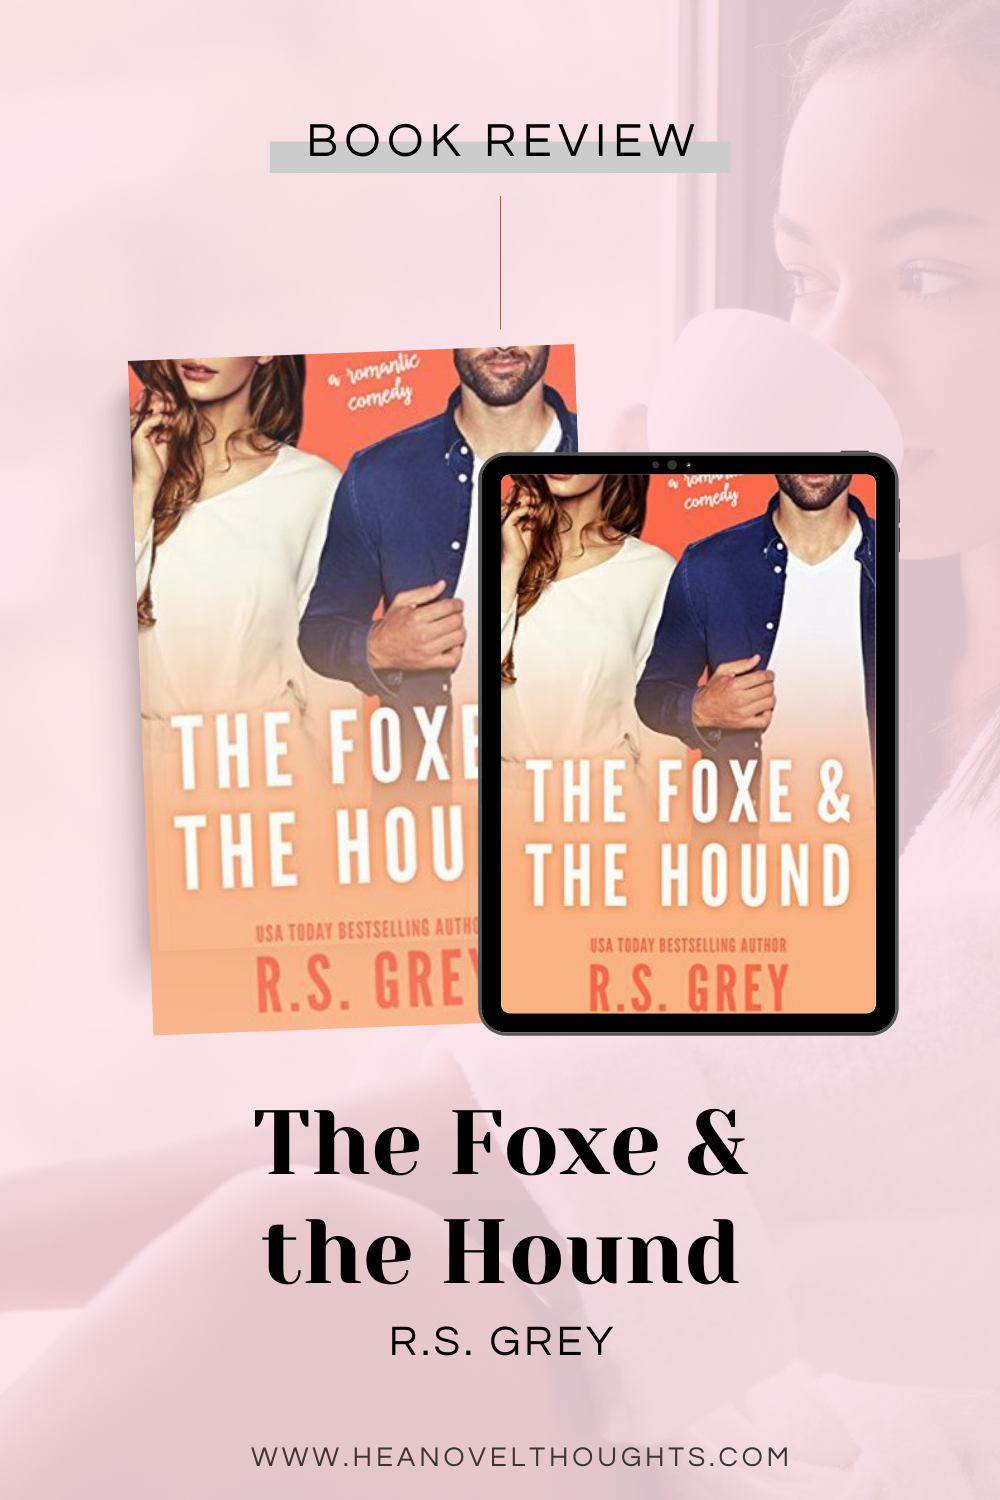 The Foxe & the Hound by R.S. Grey